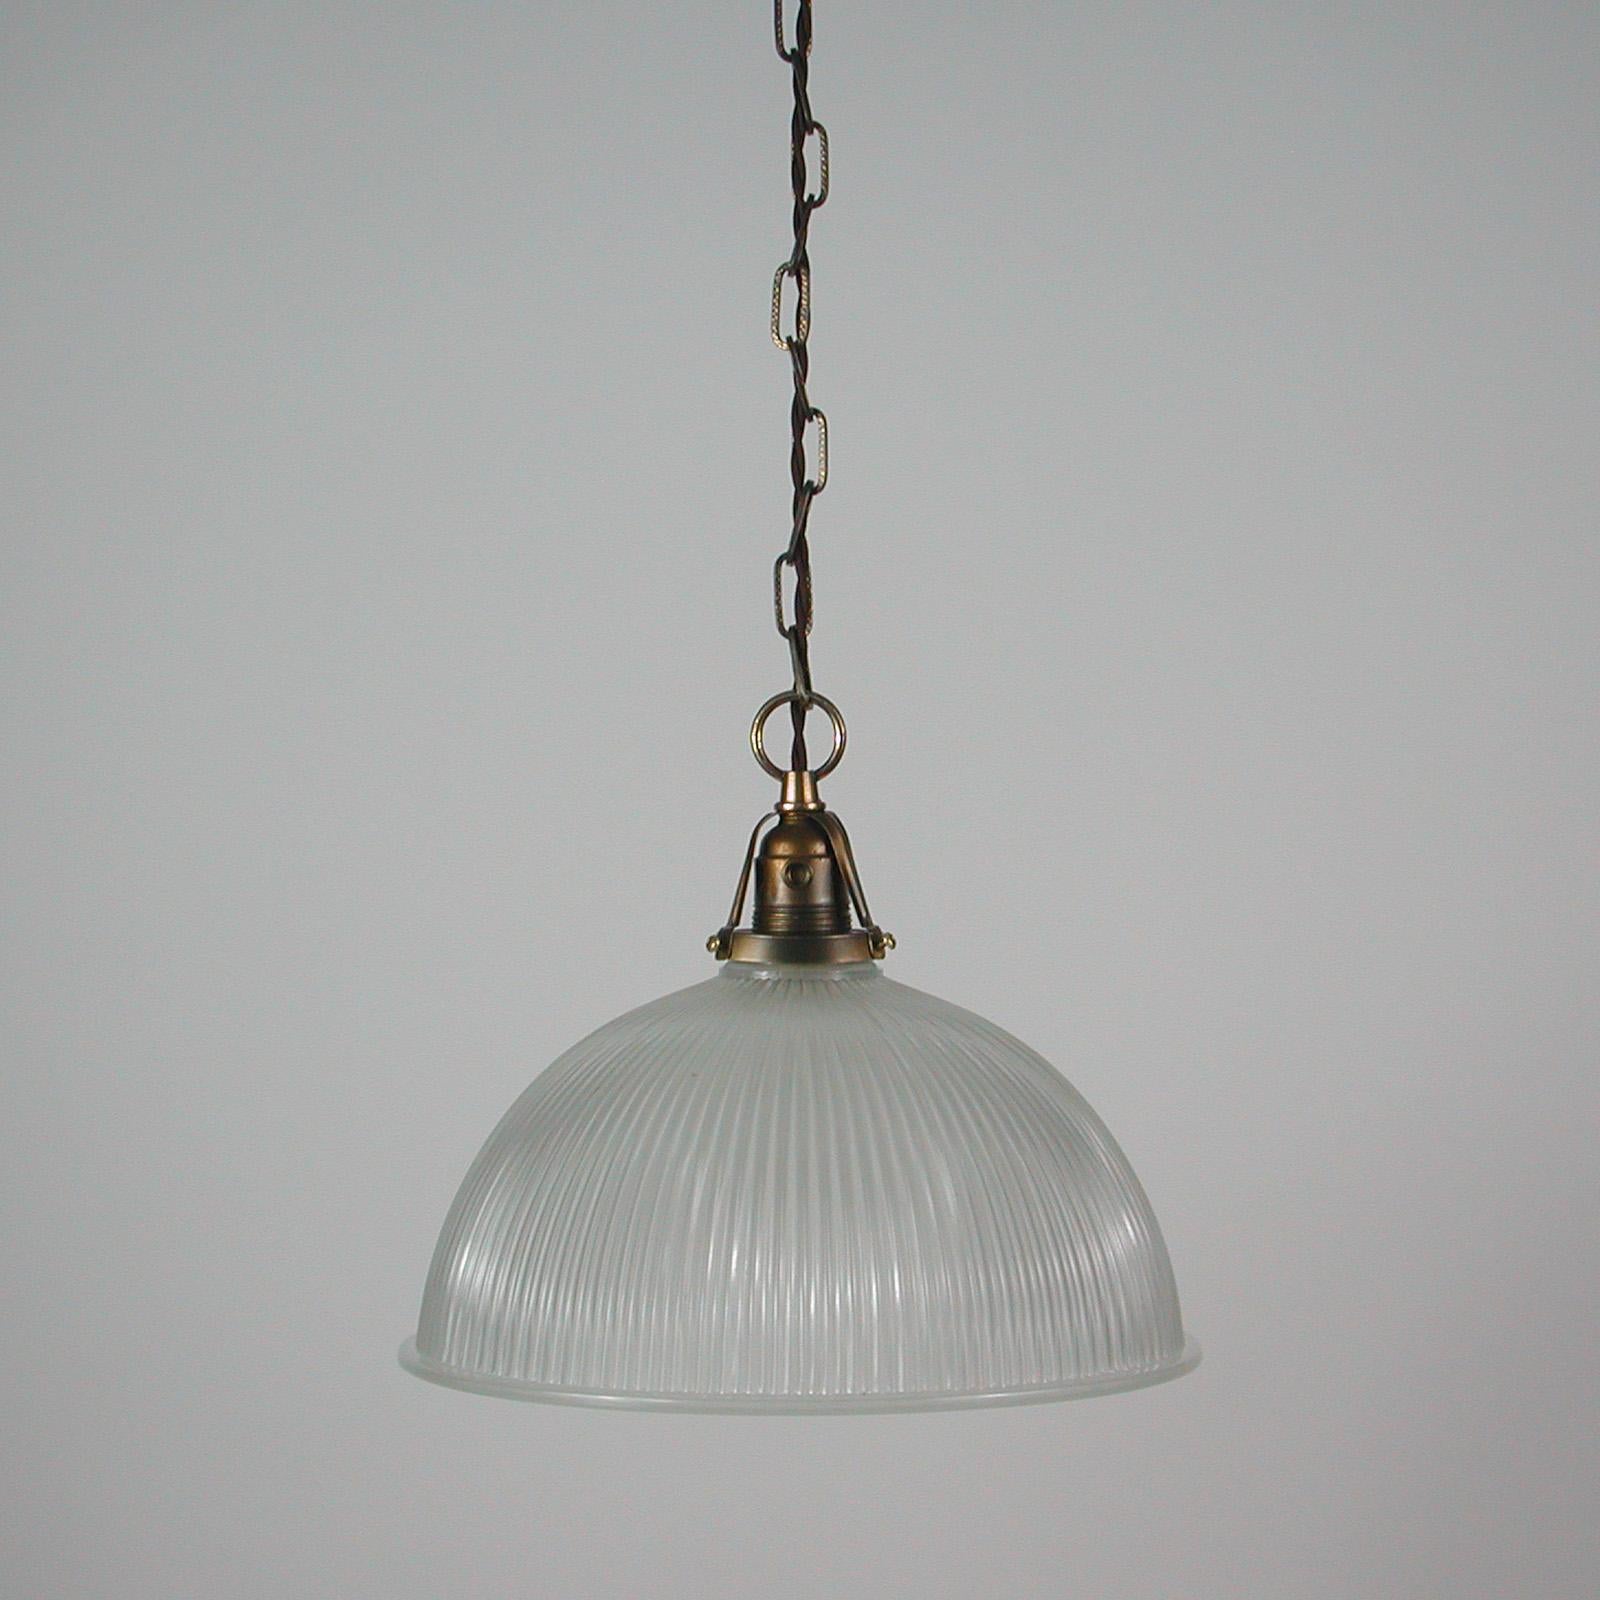 French Art Deco Holophane Industrial Glass Pendant Lamp, France, 1930s